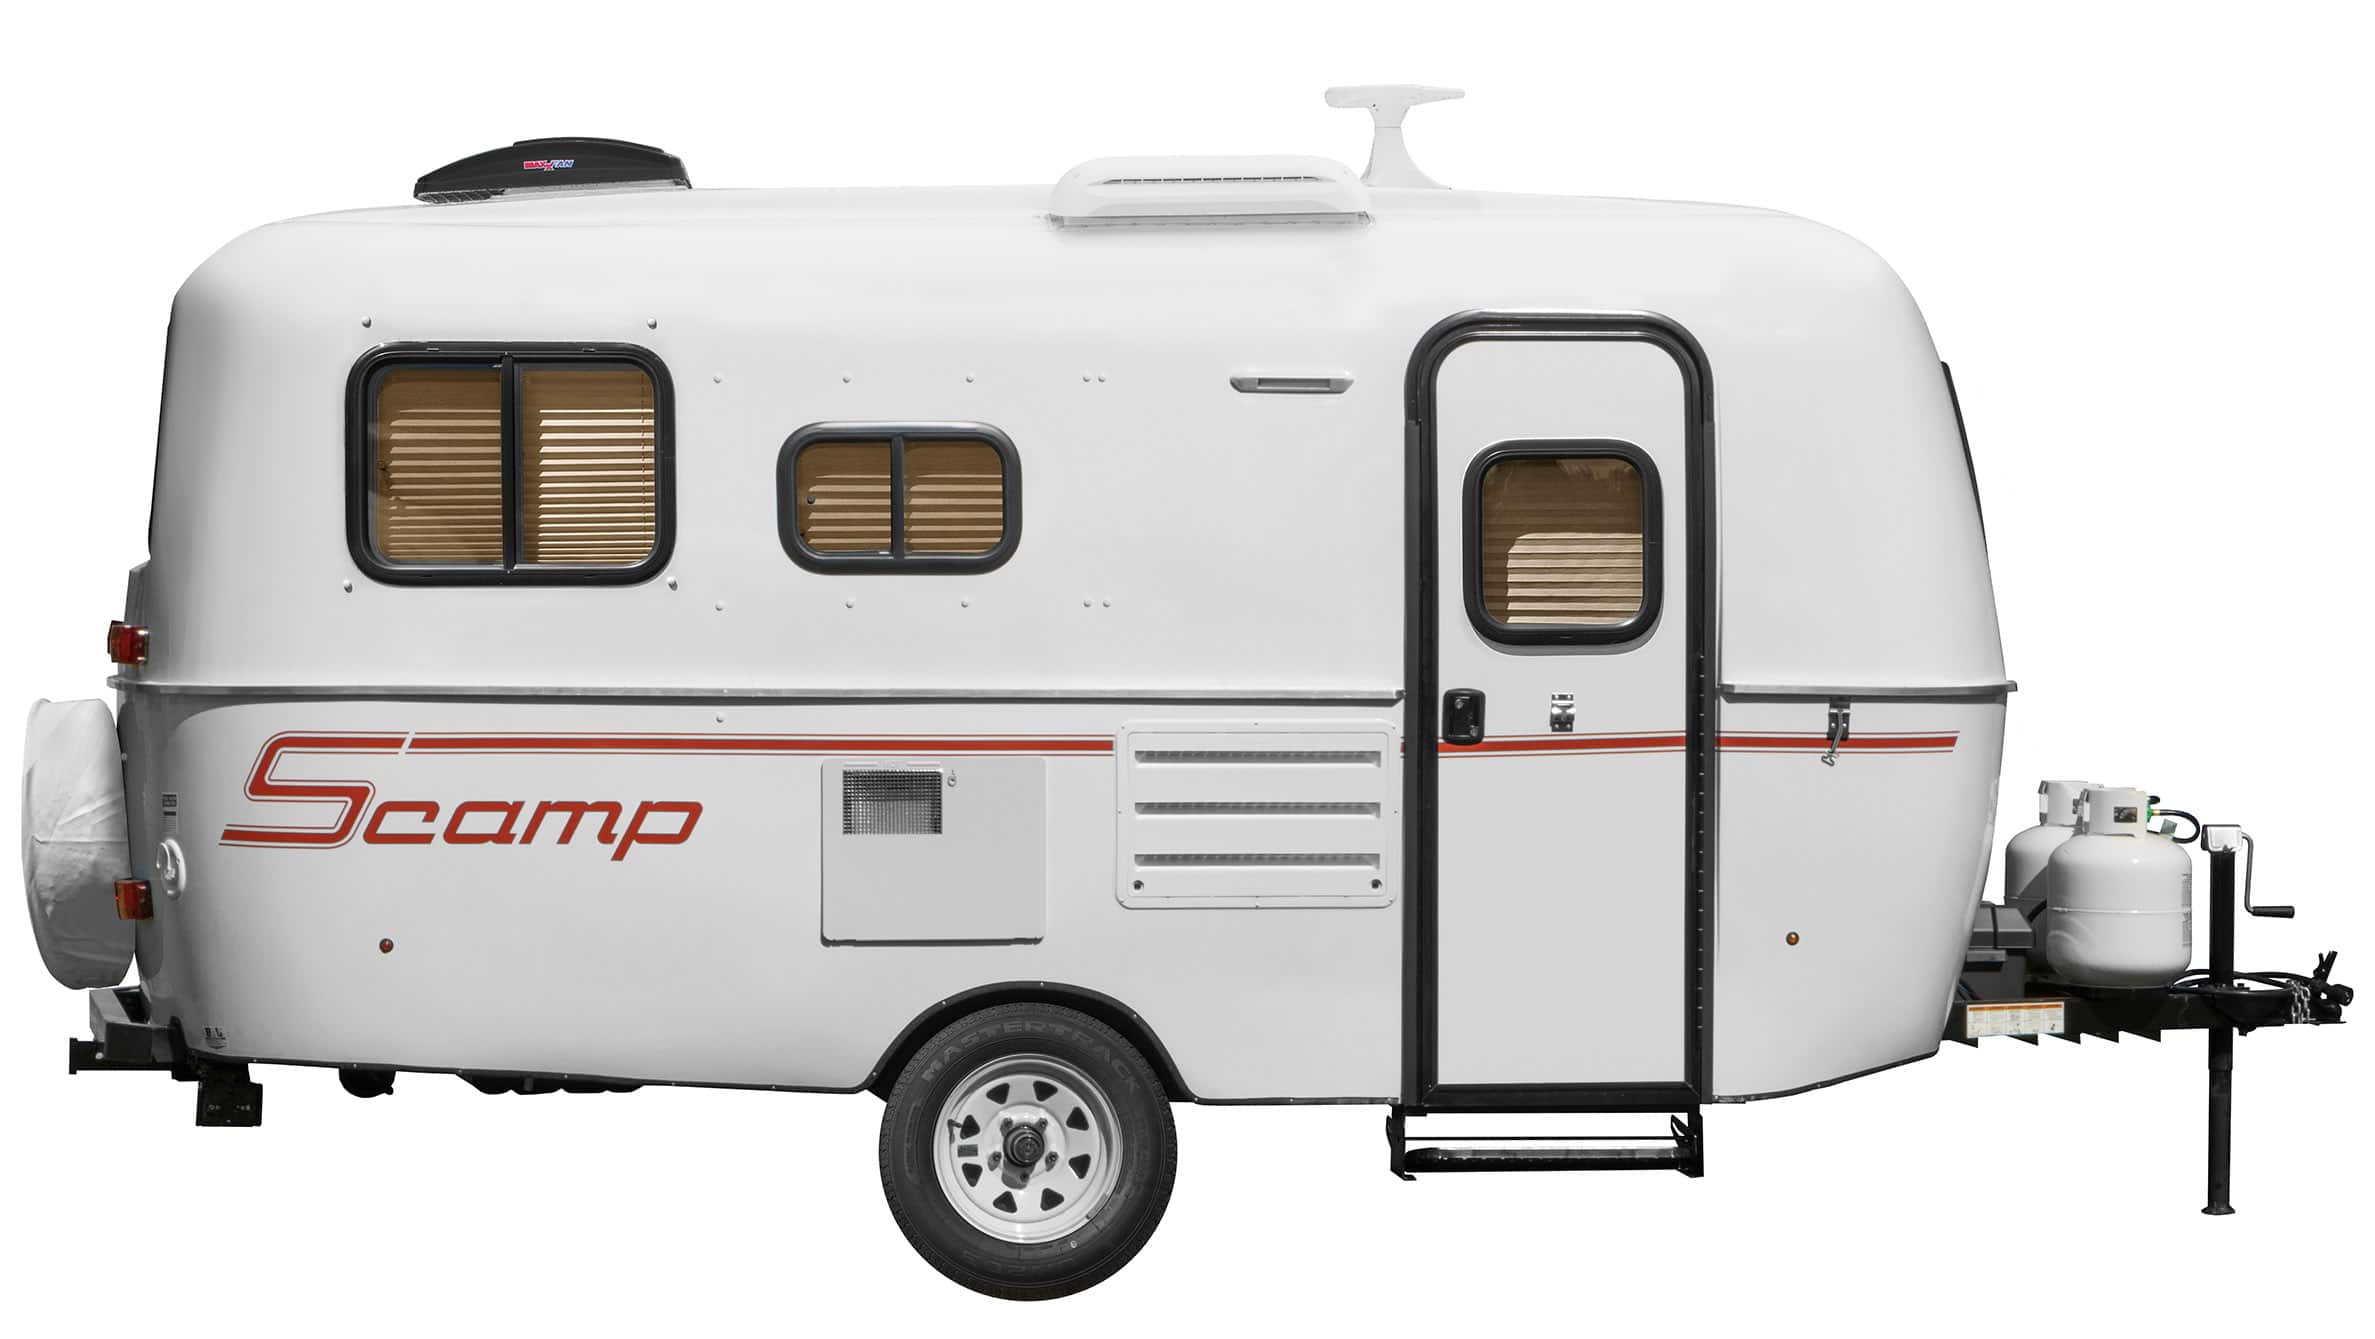 who makes the scamp travel trailer